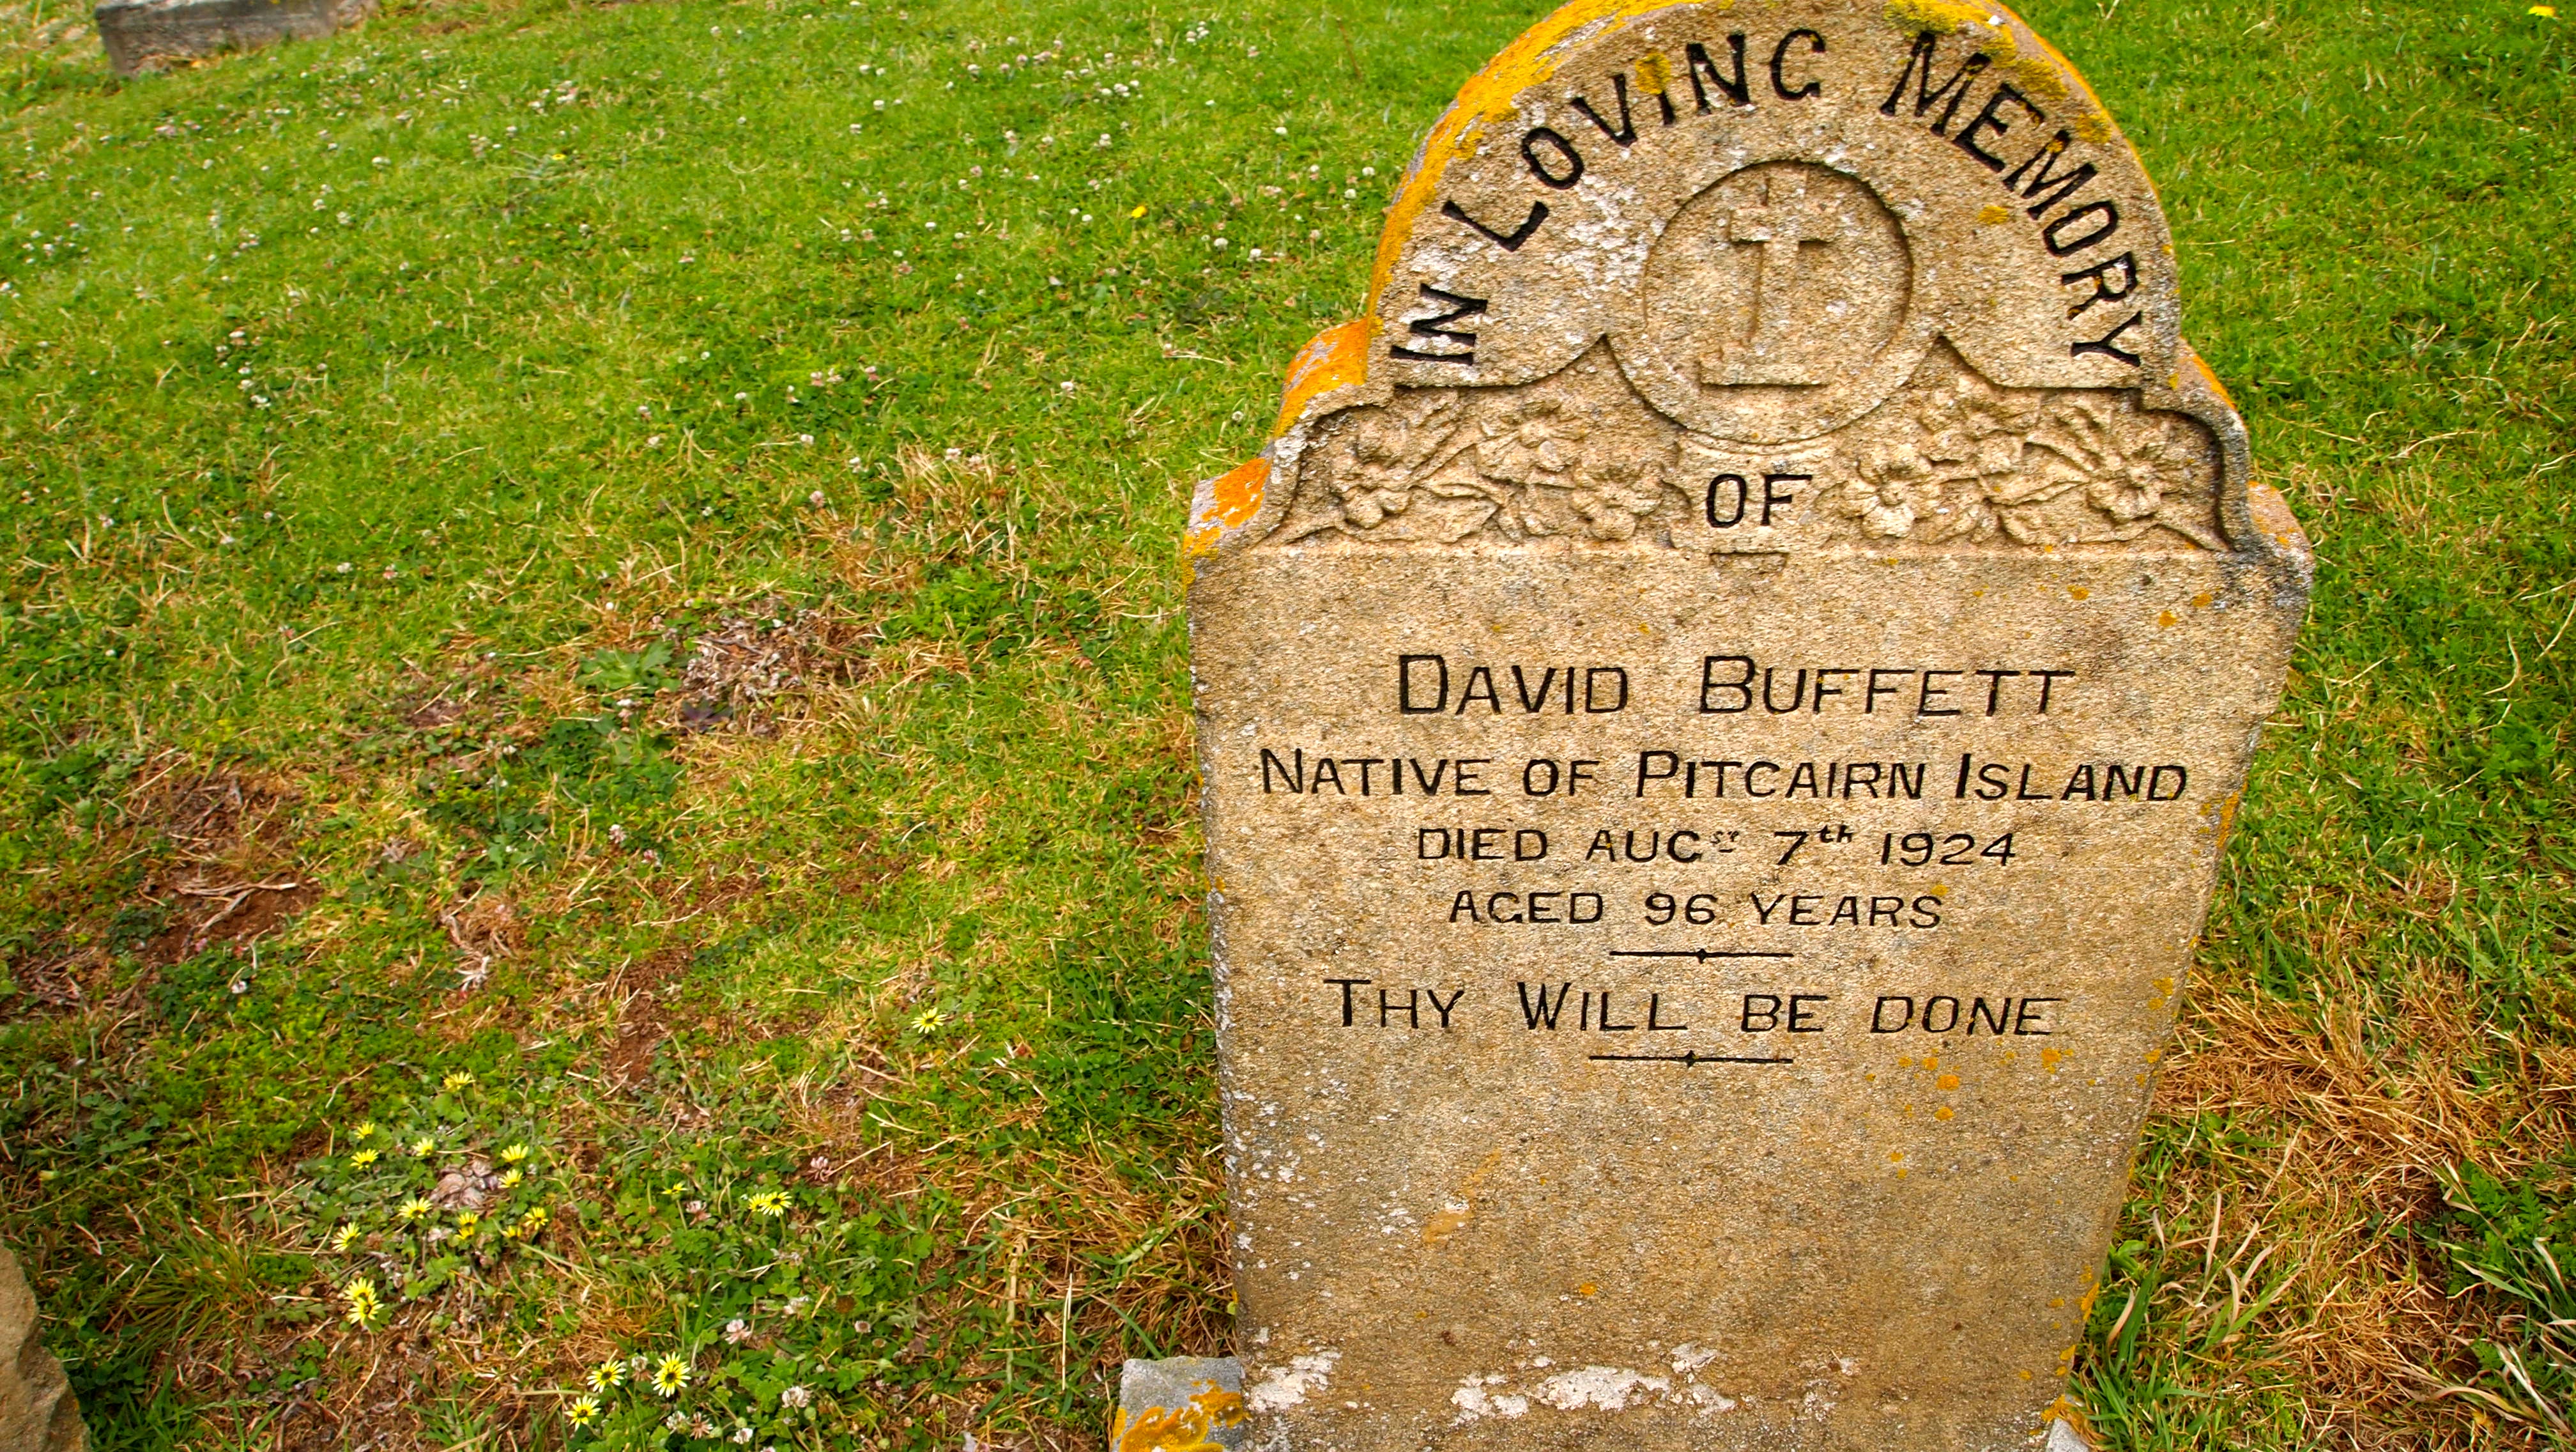 Tombstone marking the grave of a Pitcairner on Norfolk Island. Photo taken on October 29, 2015.